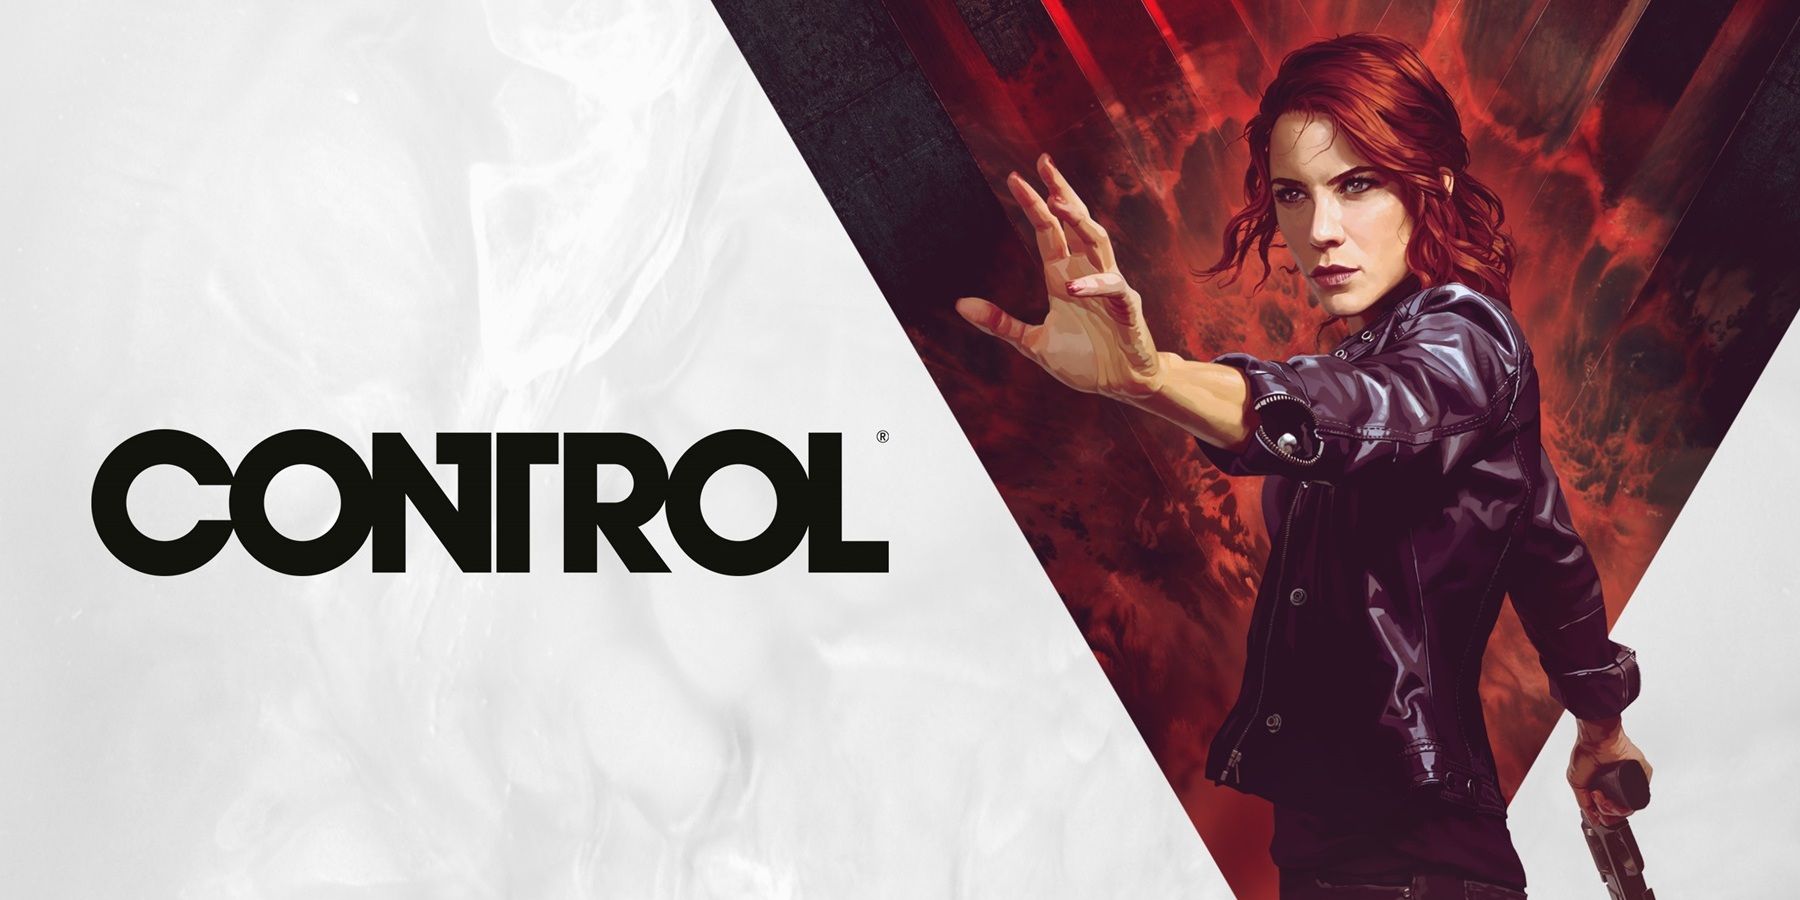 remedy-reveals-new-details-about-control-spin-off-game